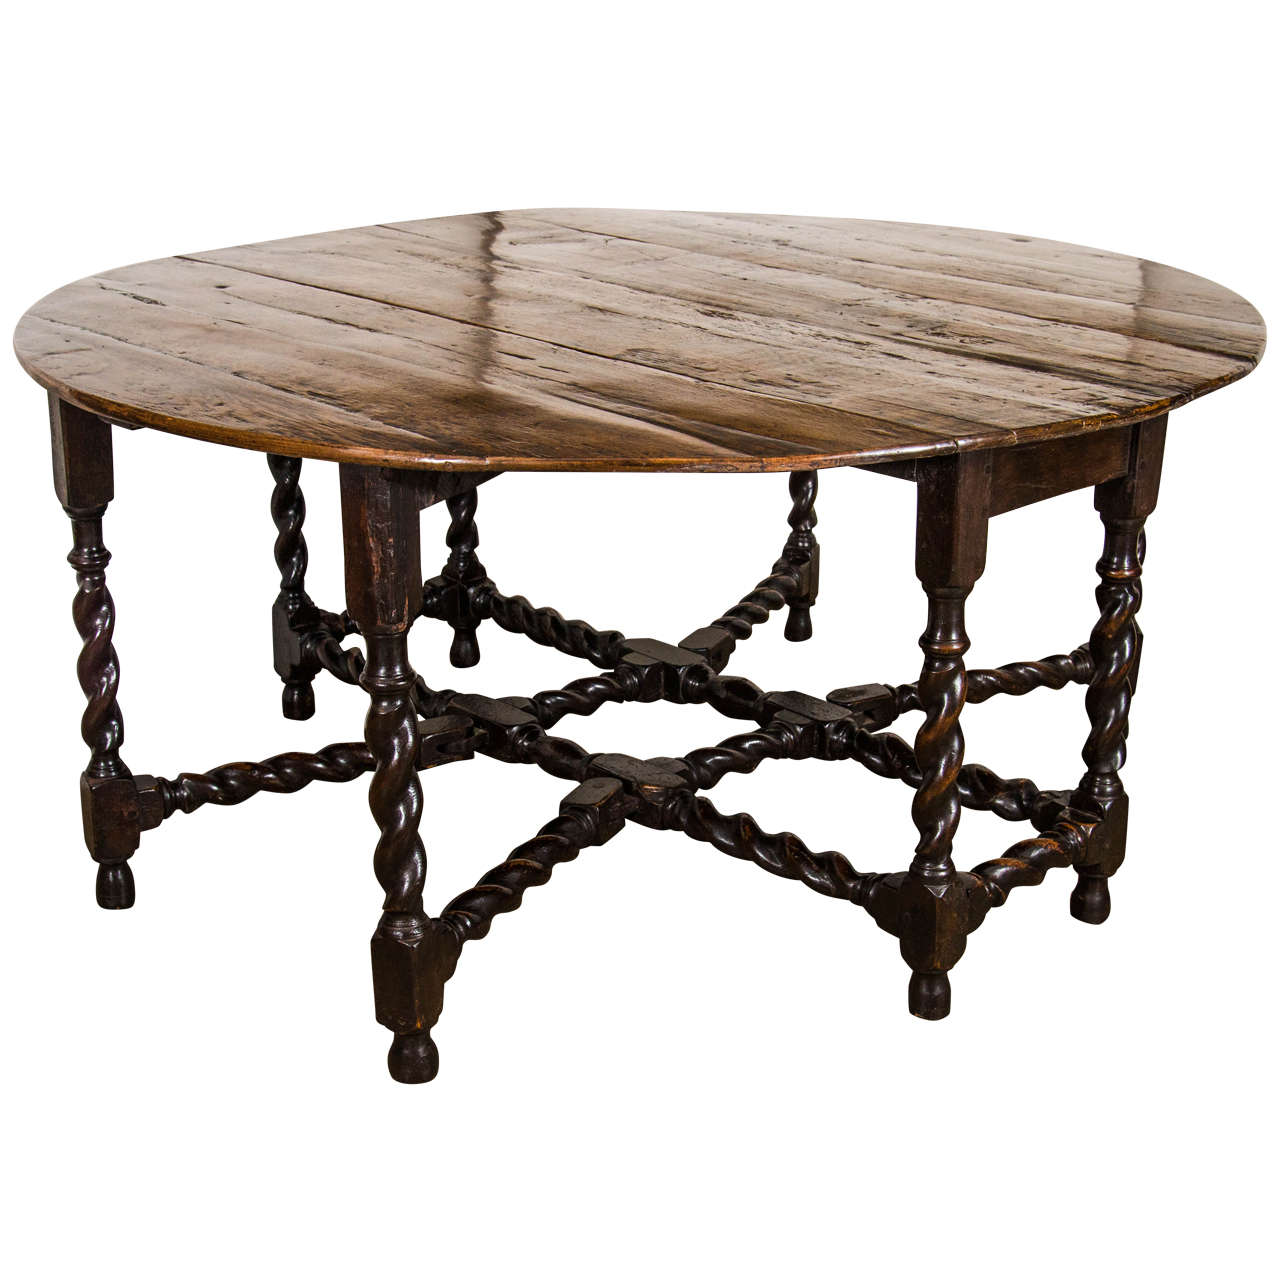 English Chestnut and Oak 19th Century Double Gate-Leg Table For Sale